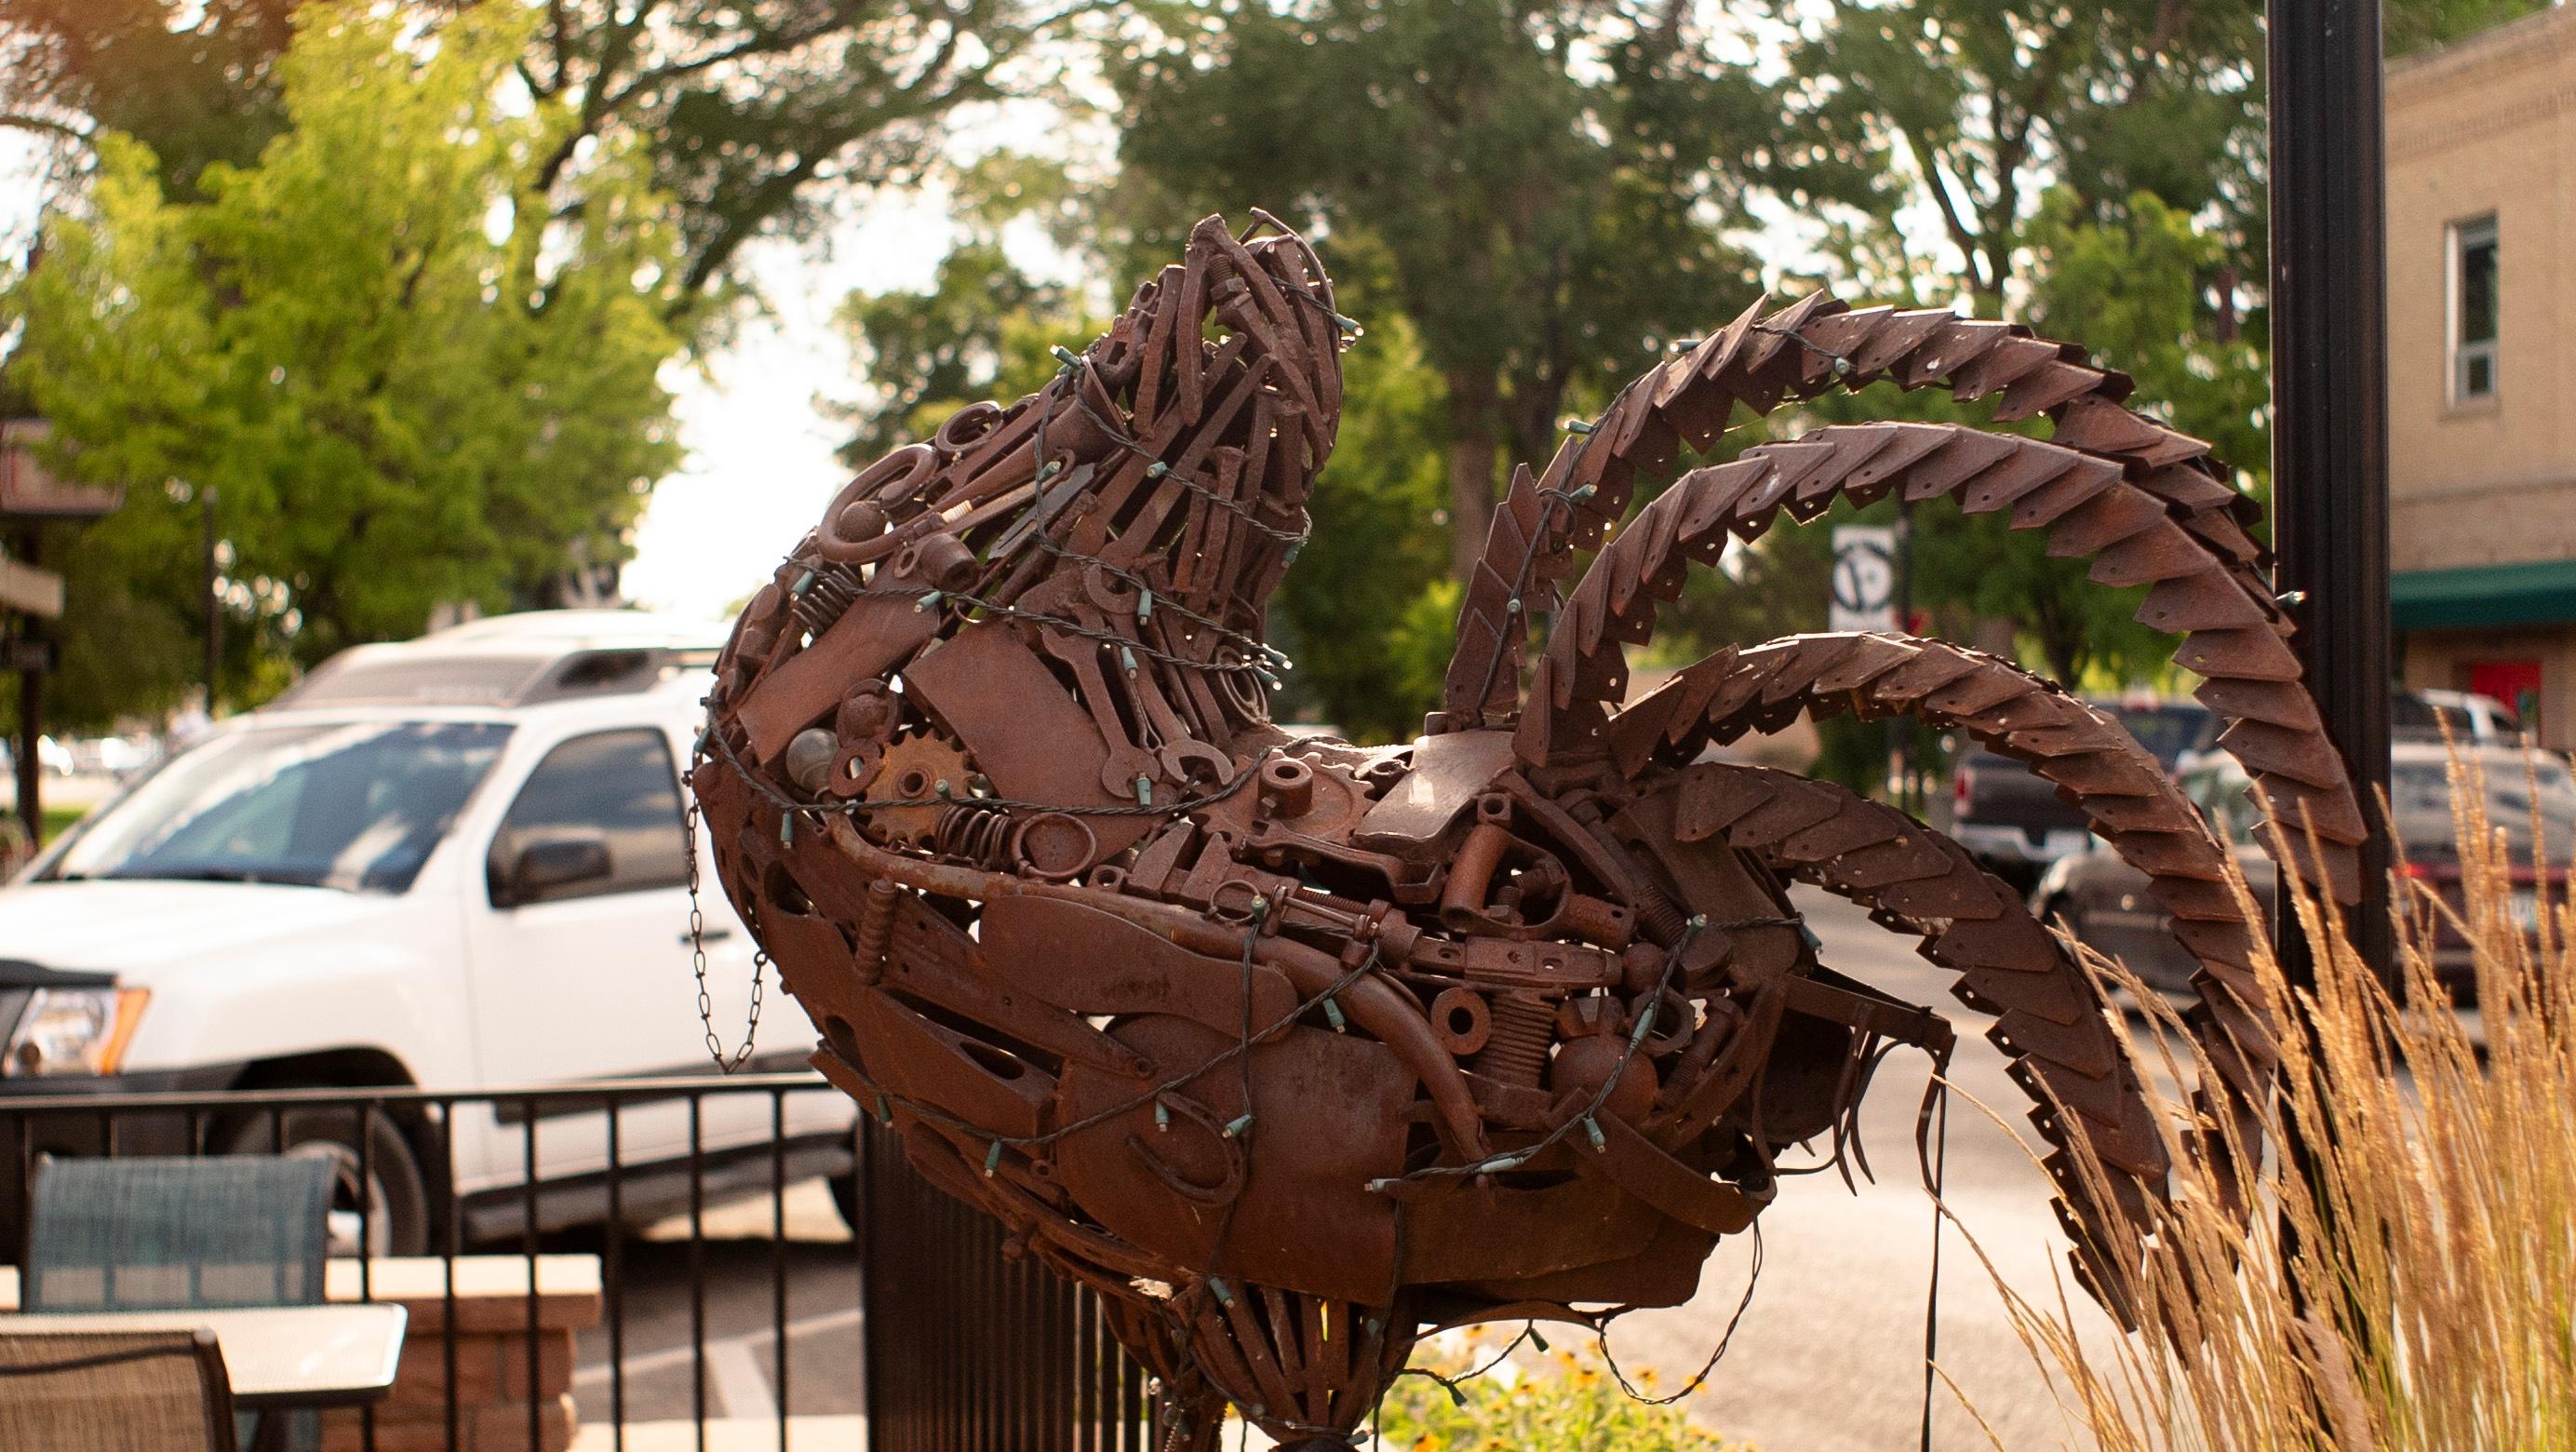 A sculpture by Lyle Nichols of Mike, the famed headless rooster, in downtown Fruita.